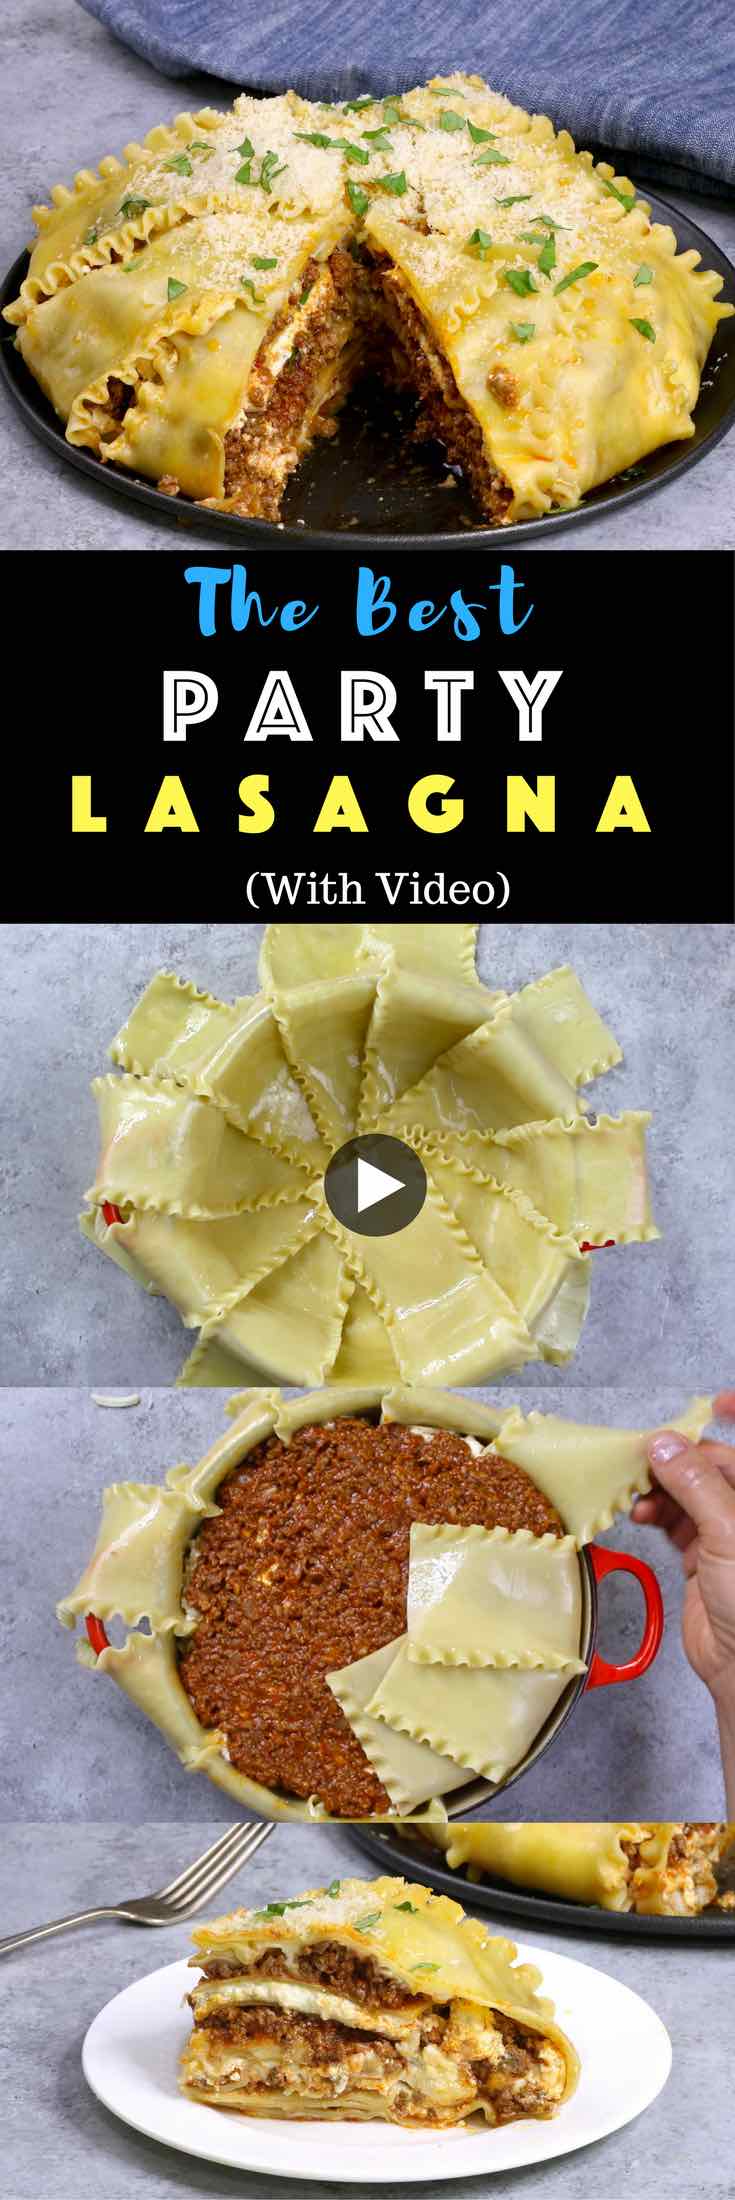 Easy, cheesy lasagna cake for parties – A perfect way for a crowd to enjoy the pleasure of lasagna. All you need is a few simple ingredients: lasagna noodles, ground beef, onions, garlic, ricotta cheese, parmesan cheese, mozzarella, oil, egg, tomato and fresh basil for garnish. A perfect dinner for the whole family or a party! Party food. Video recipe. | Tipbuzz.com